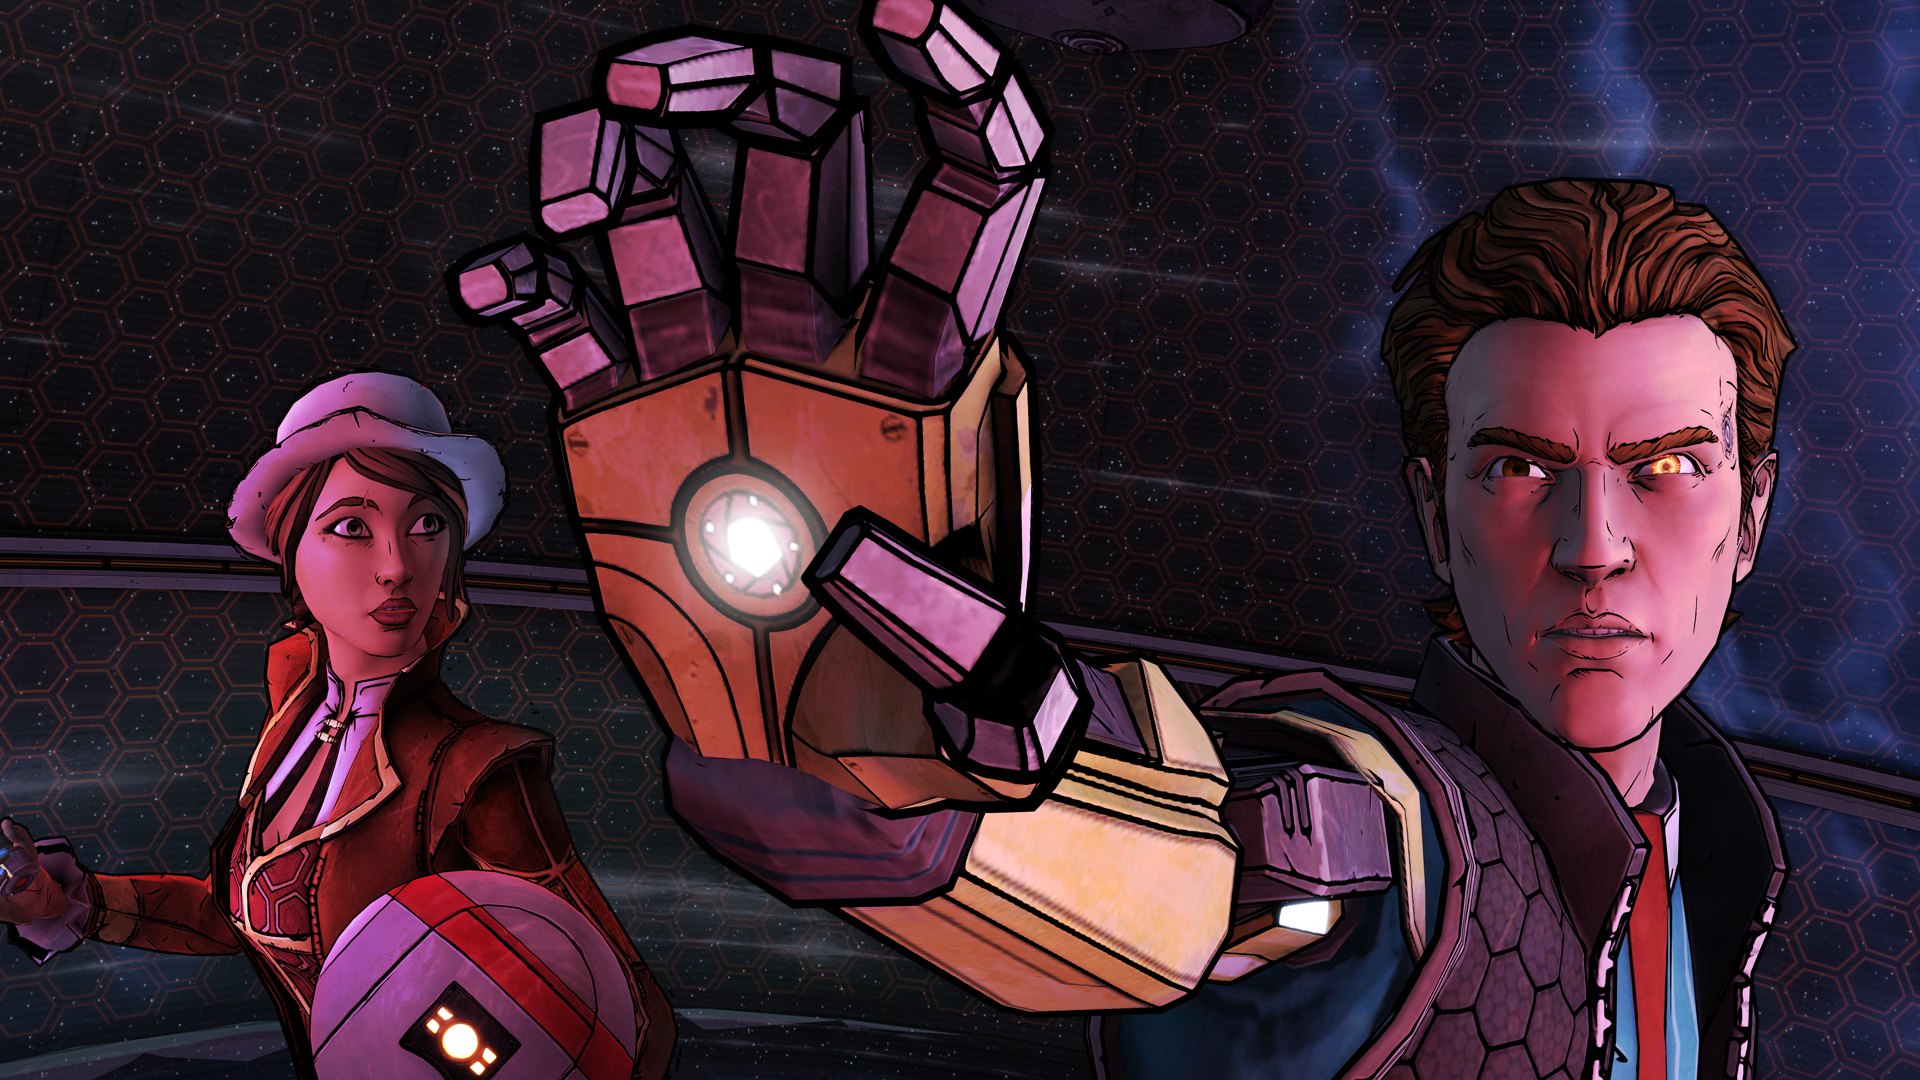 tales-from-the-borderlands-episode-3-catch-a-ride-out-on-june-23-gets-screenshots